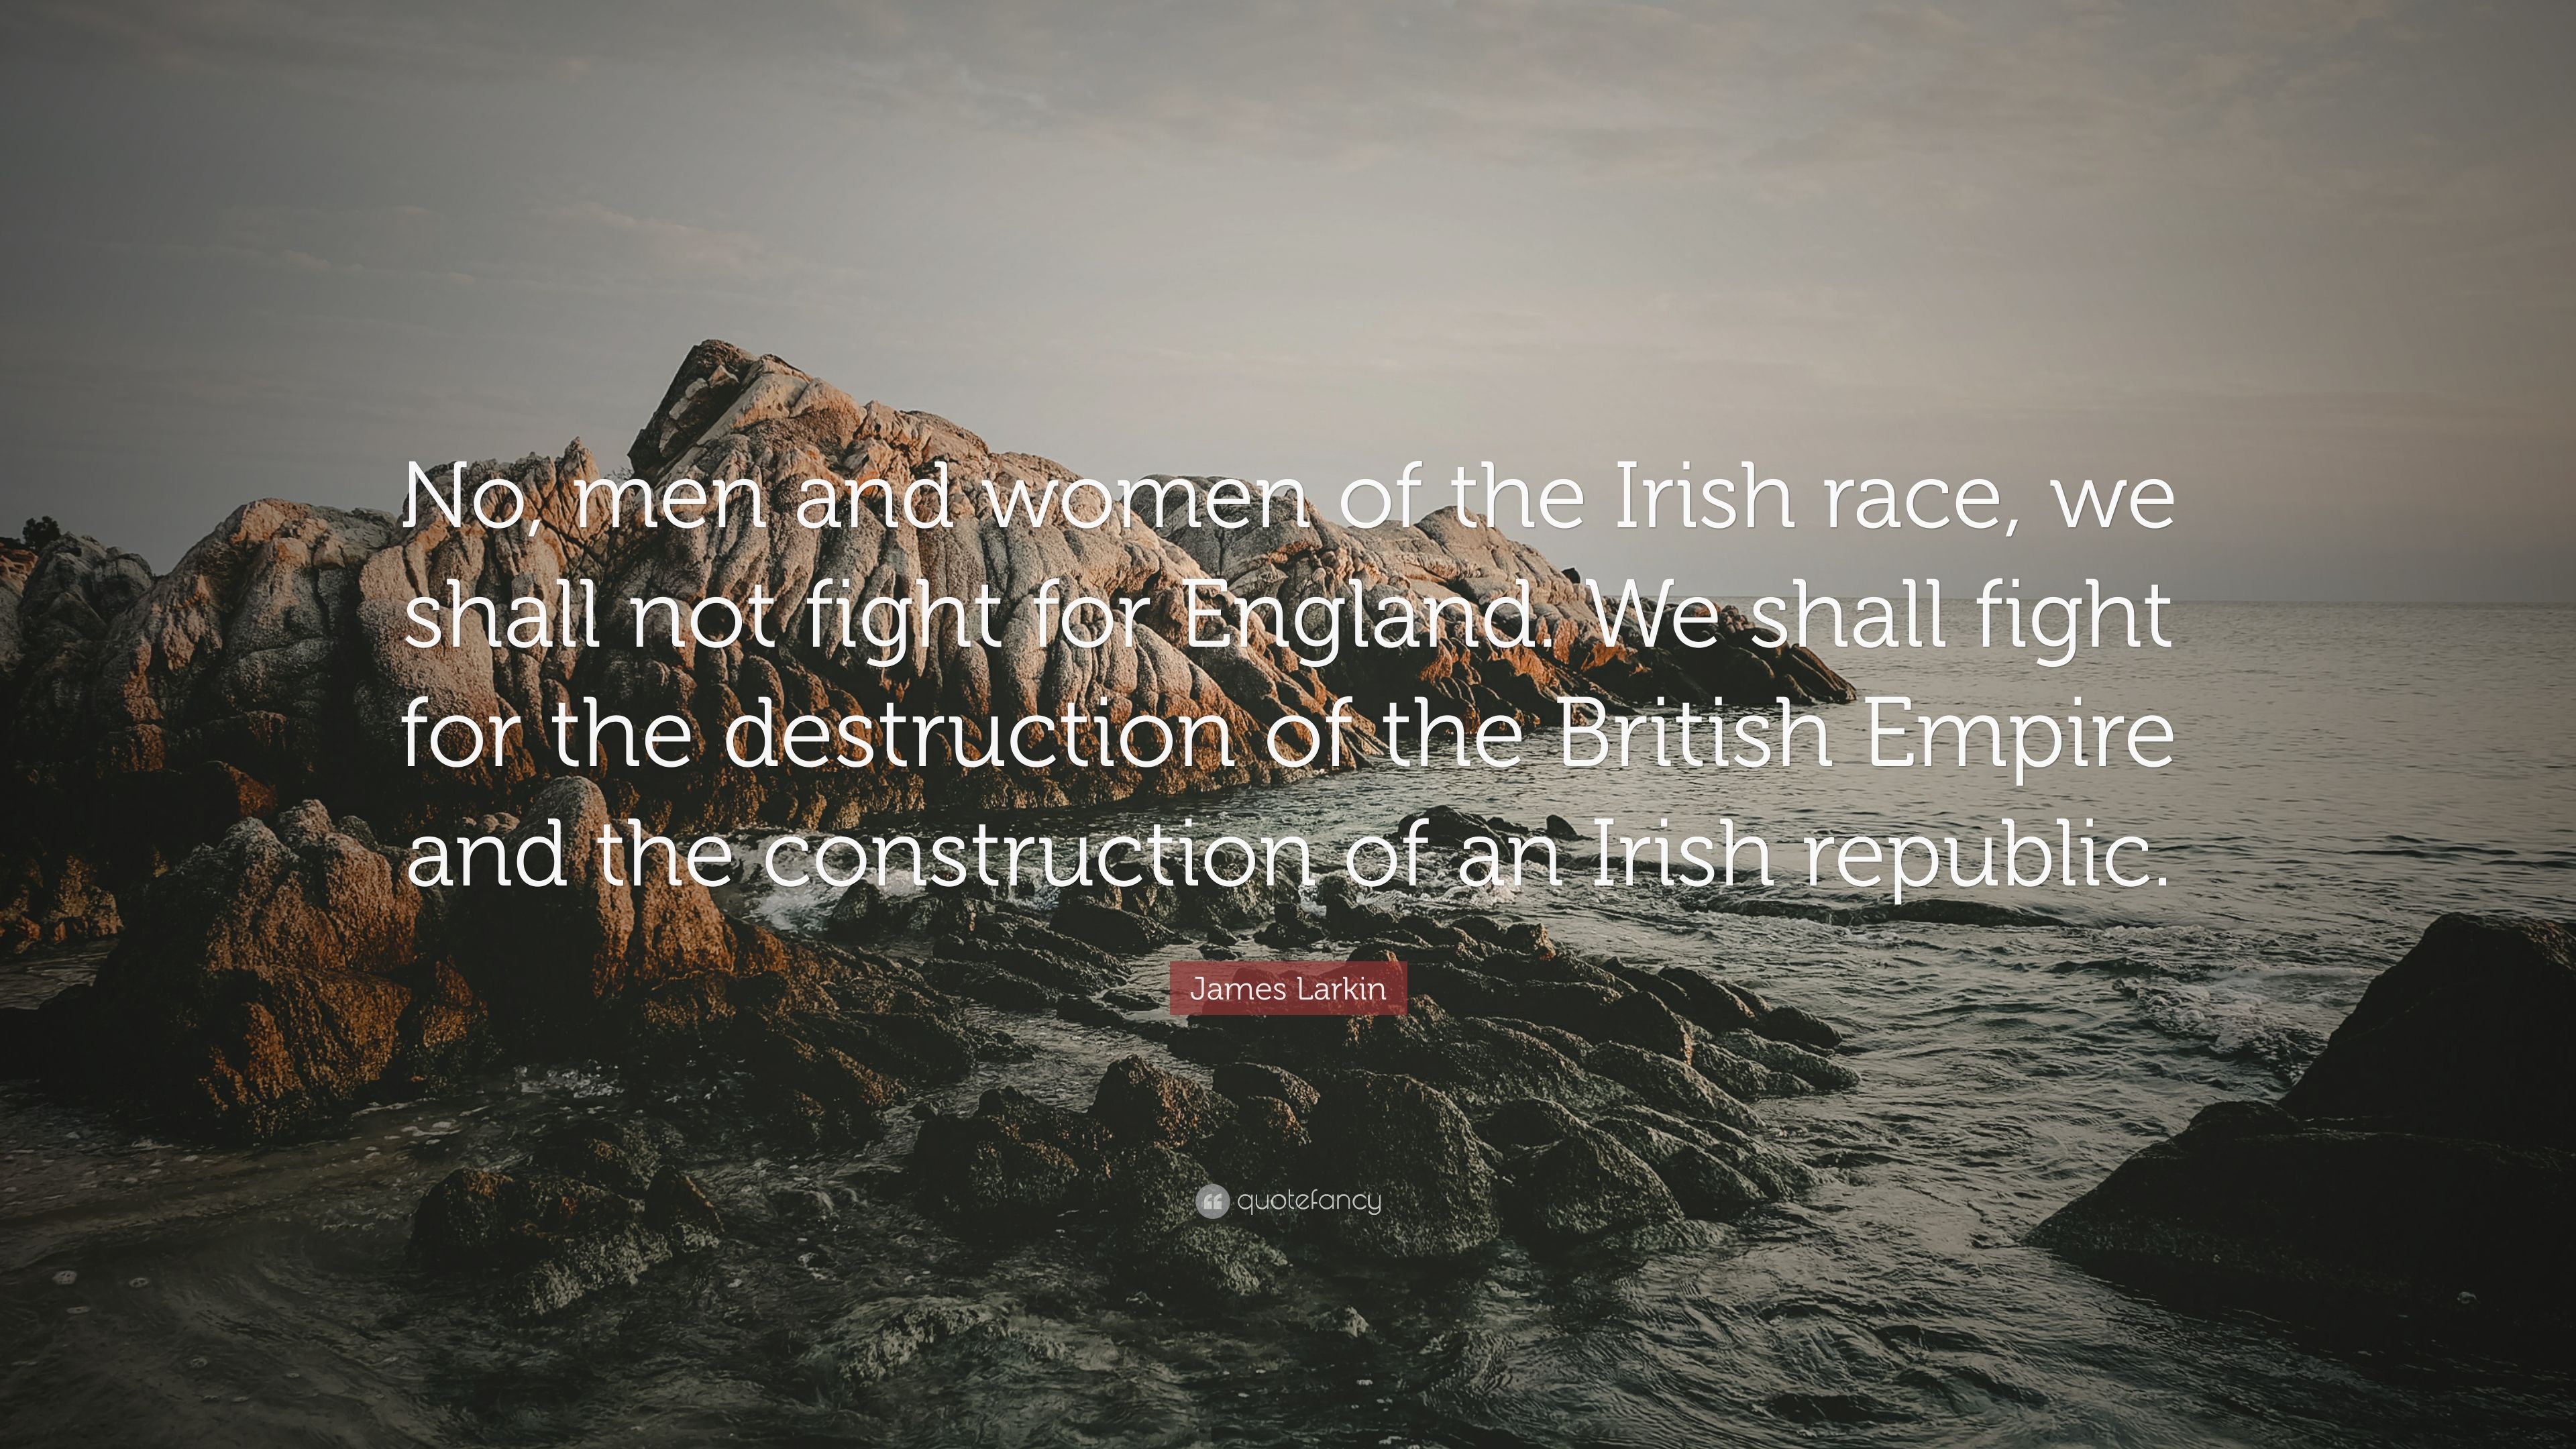 James Larkin Quote: “No, men and women of the Irish race, we shall not fight for England. We shall fight for the destruction of the British E.” (7 wallpaper)